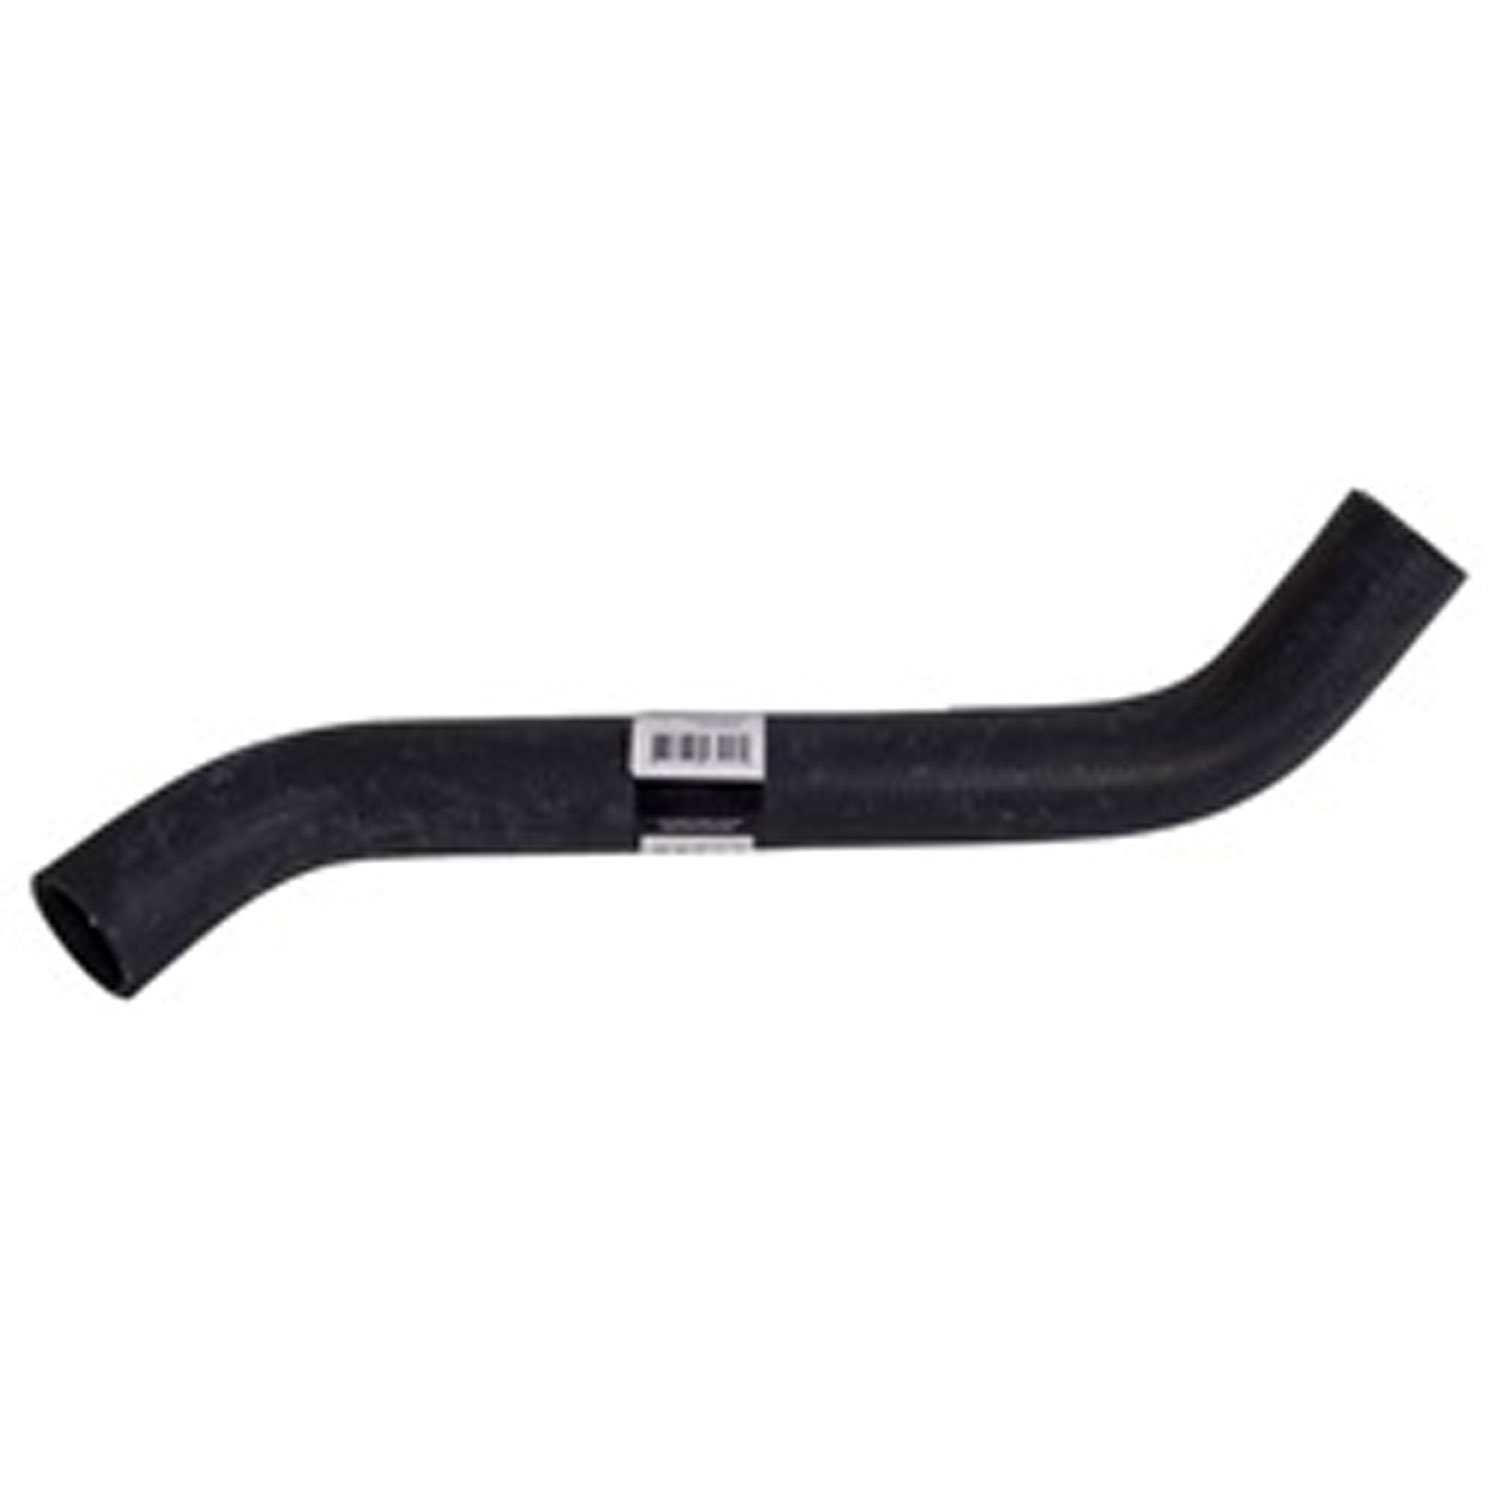 This upper radiator hose from Omix-ADA fits the 3.8L engine in 07-11 Jeep Wrangler.